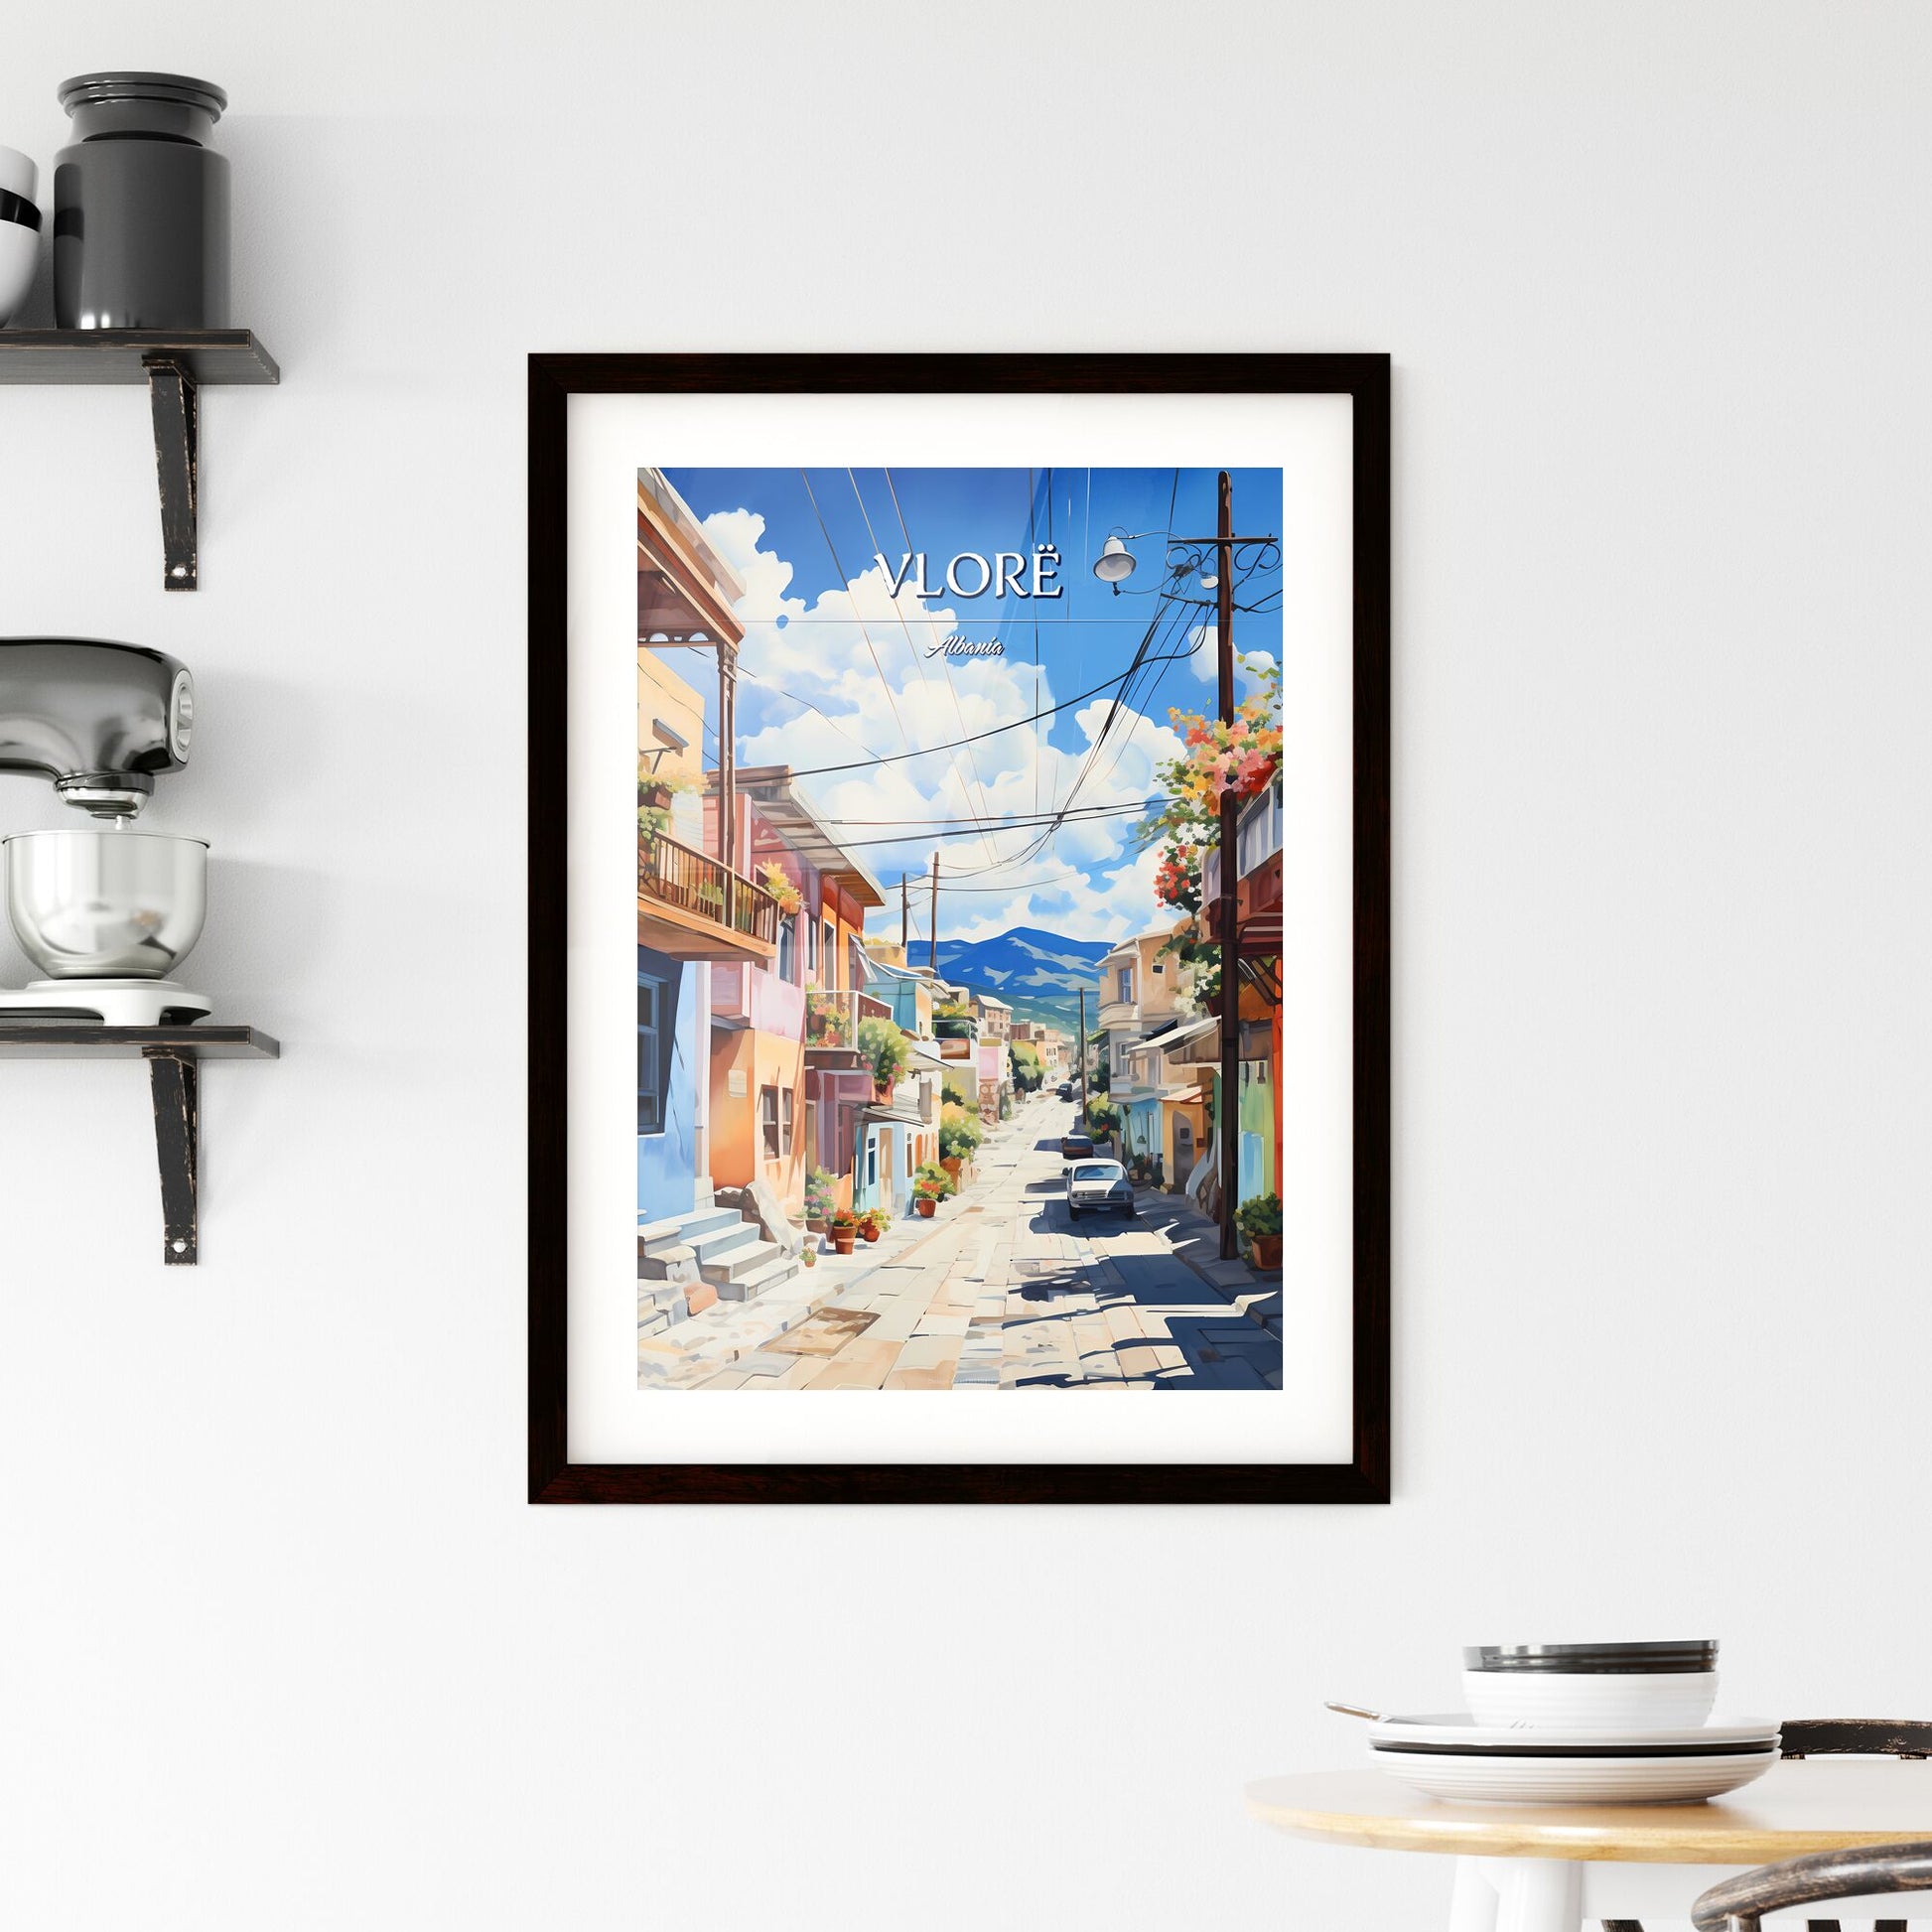 Vlorë, Albania - Art print of a watercolor painting of a street with buildings and a bell tower Default Title